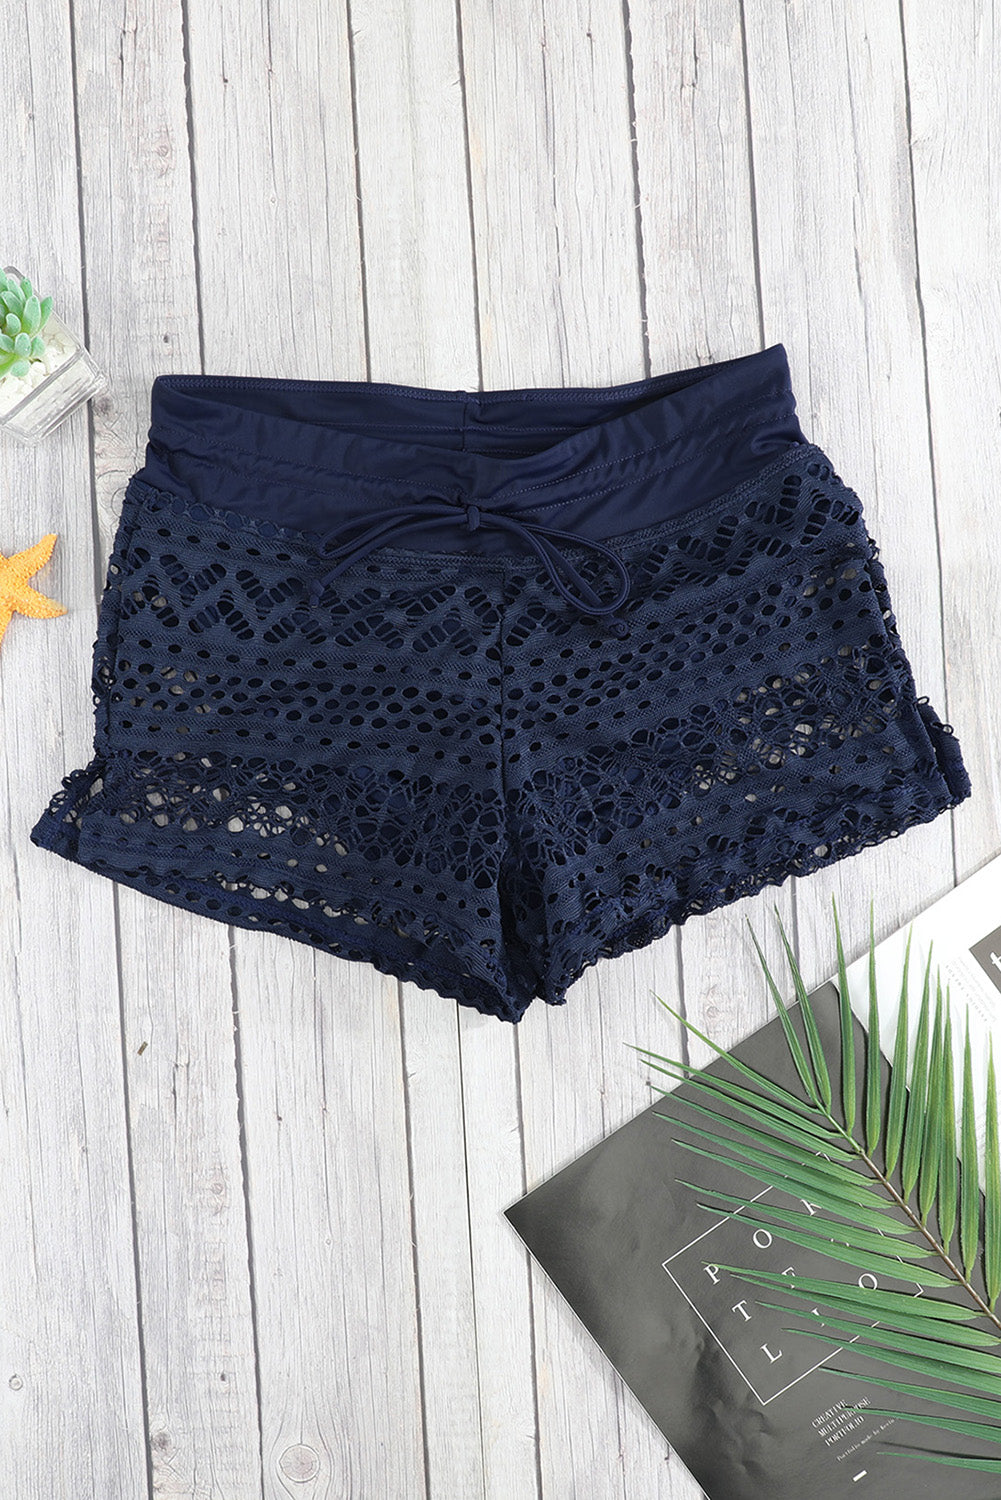 Blue Lace Shorts Attached Swim Bottom